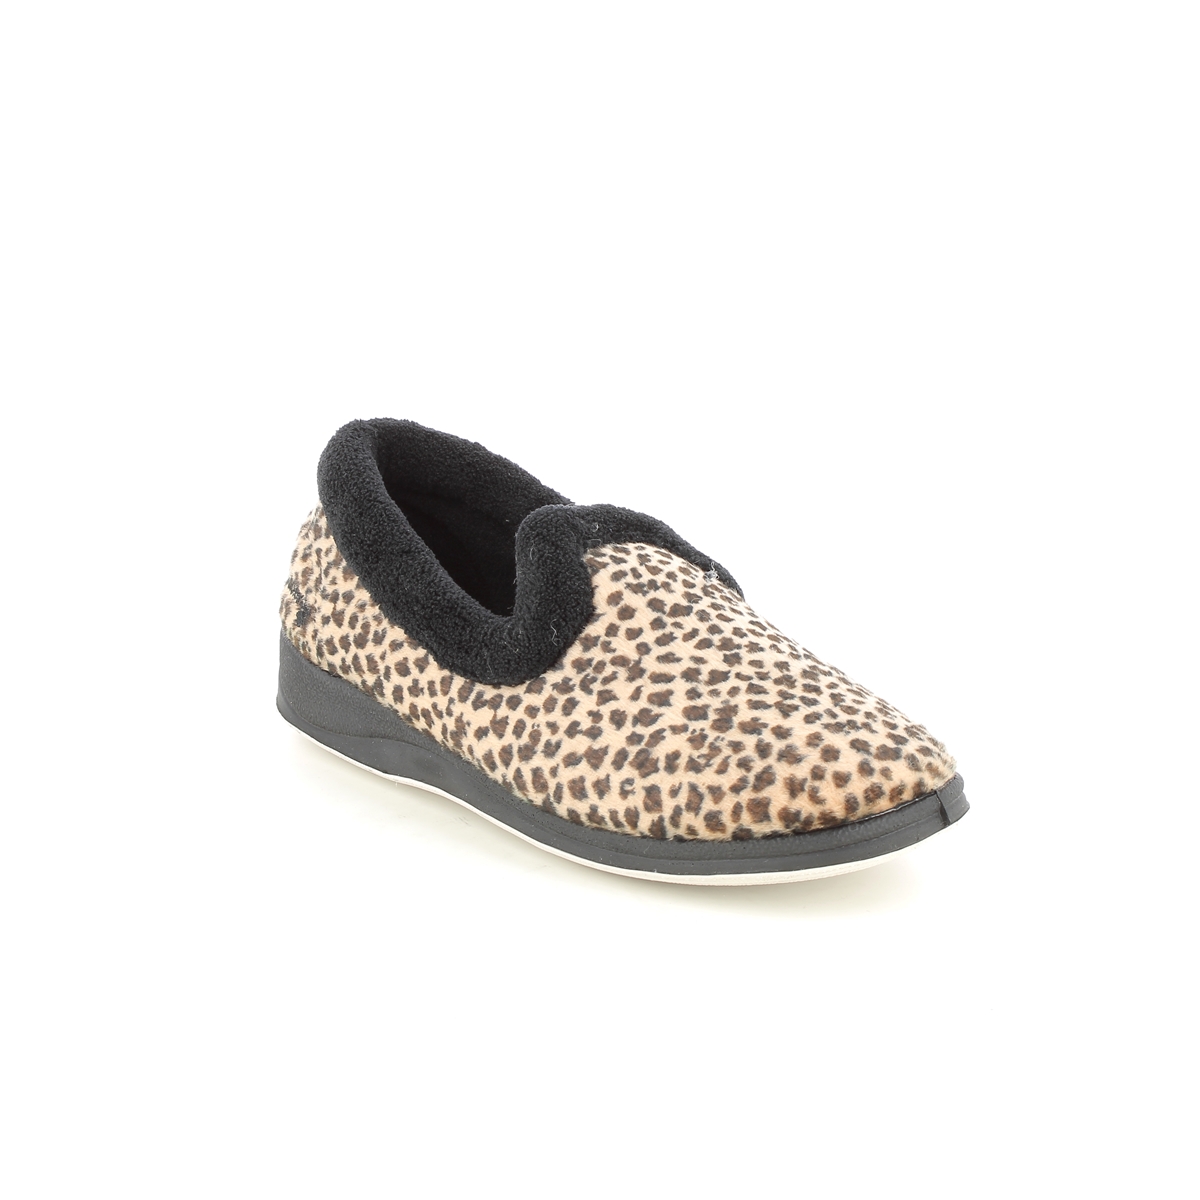 Padders Repose Ee Fit Leopard print Womens slippers 406-2500 in a Plain Textile in Size 8